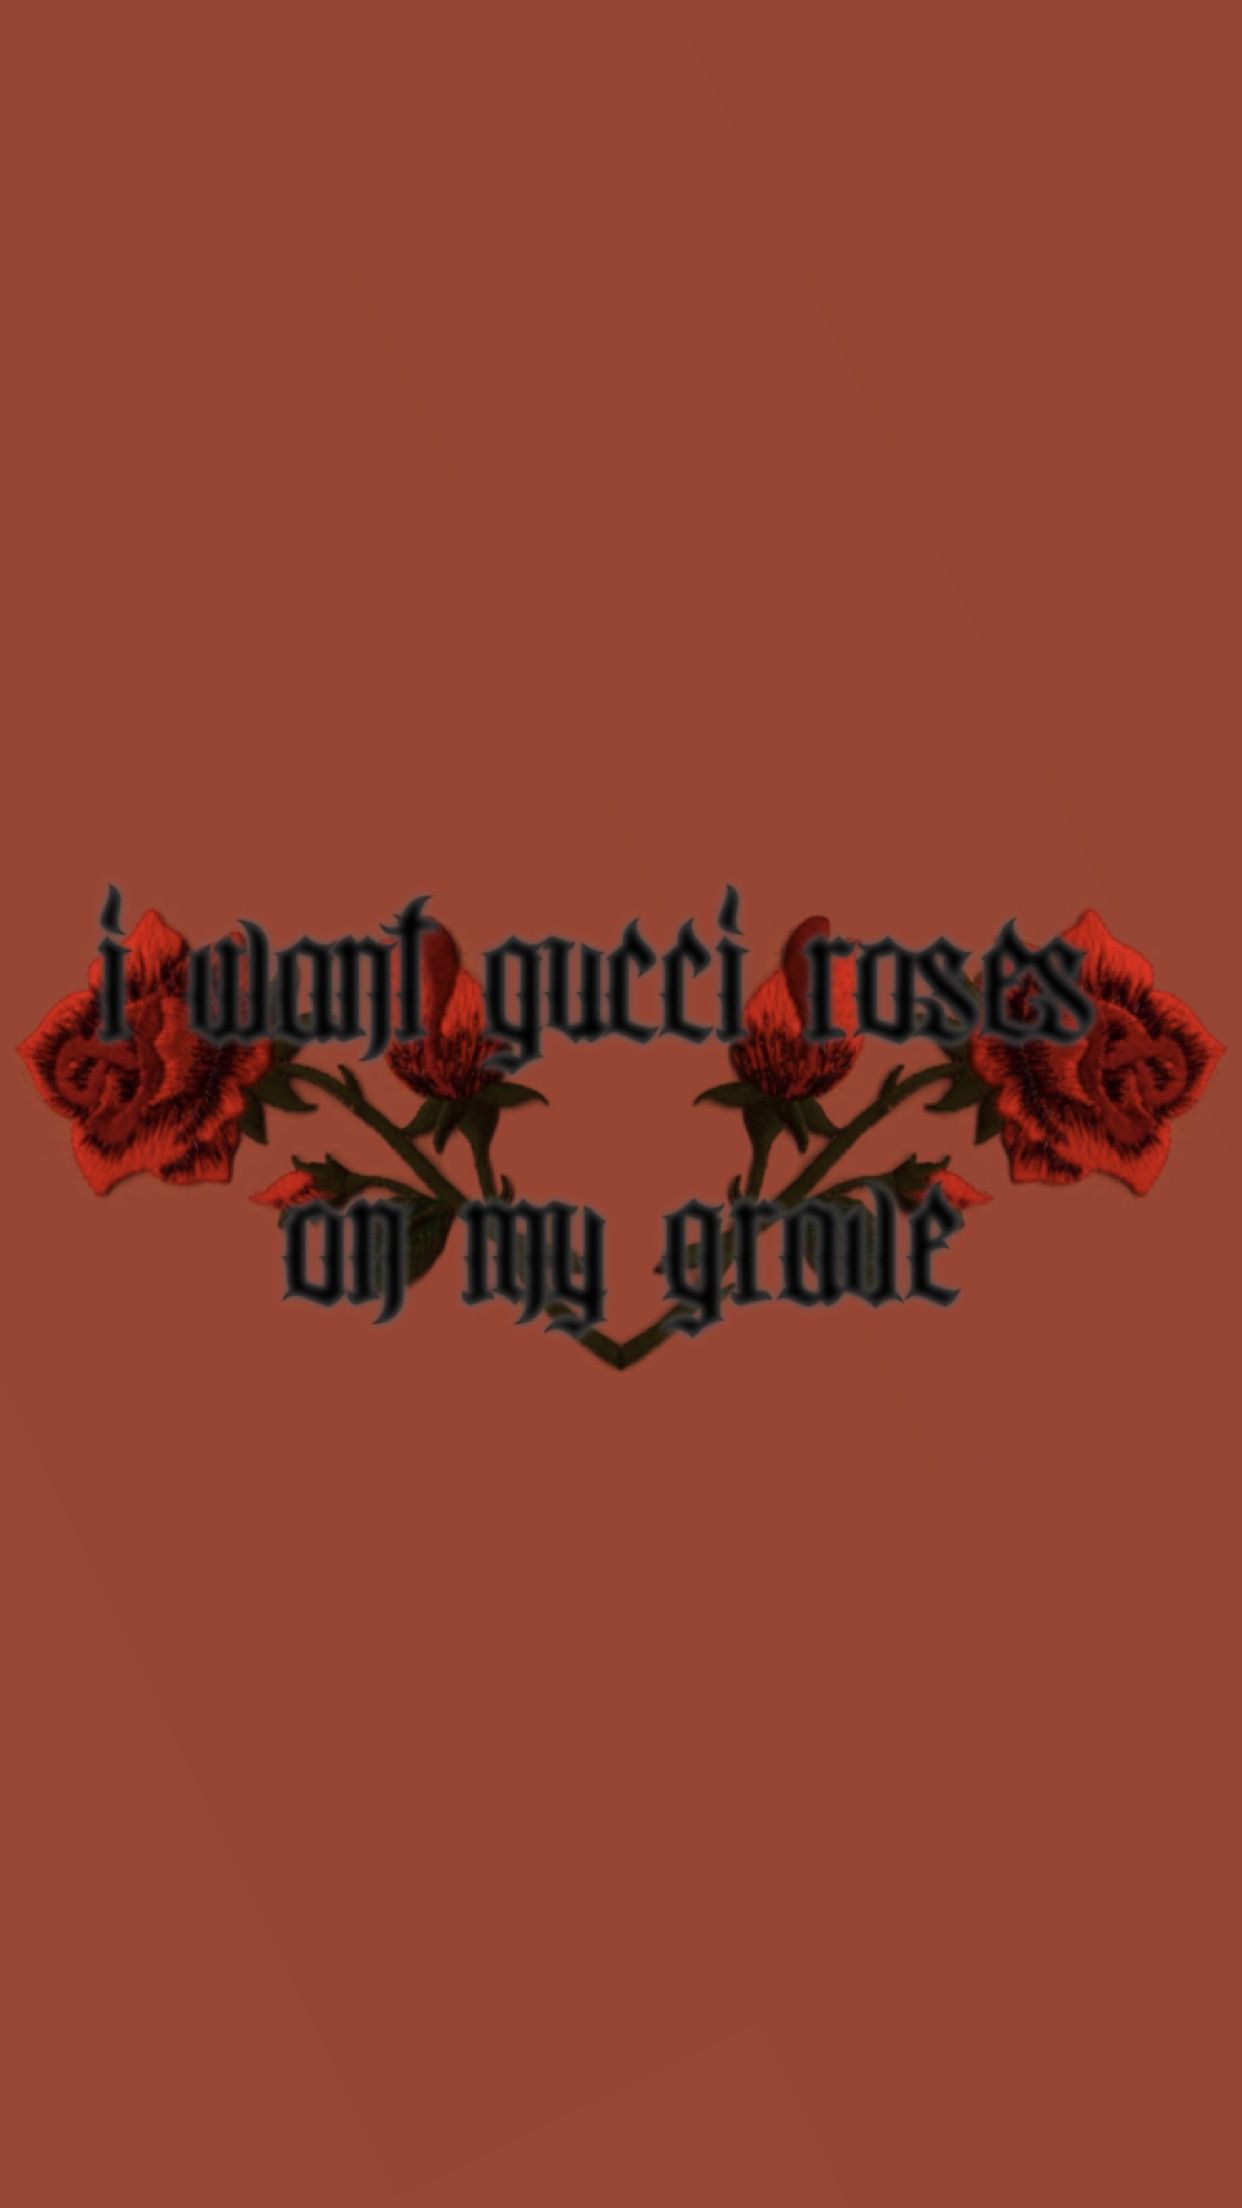 I Want Gucci Roses On My Grave Wallpaper Made By Laurette